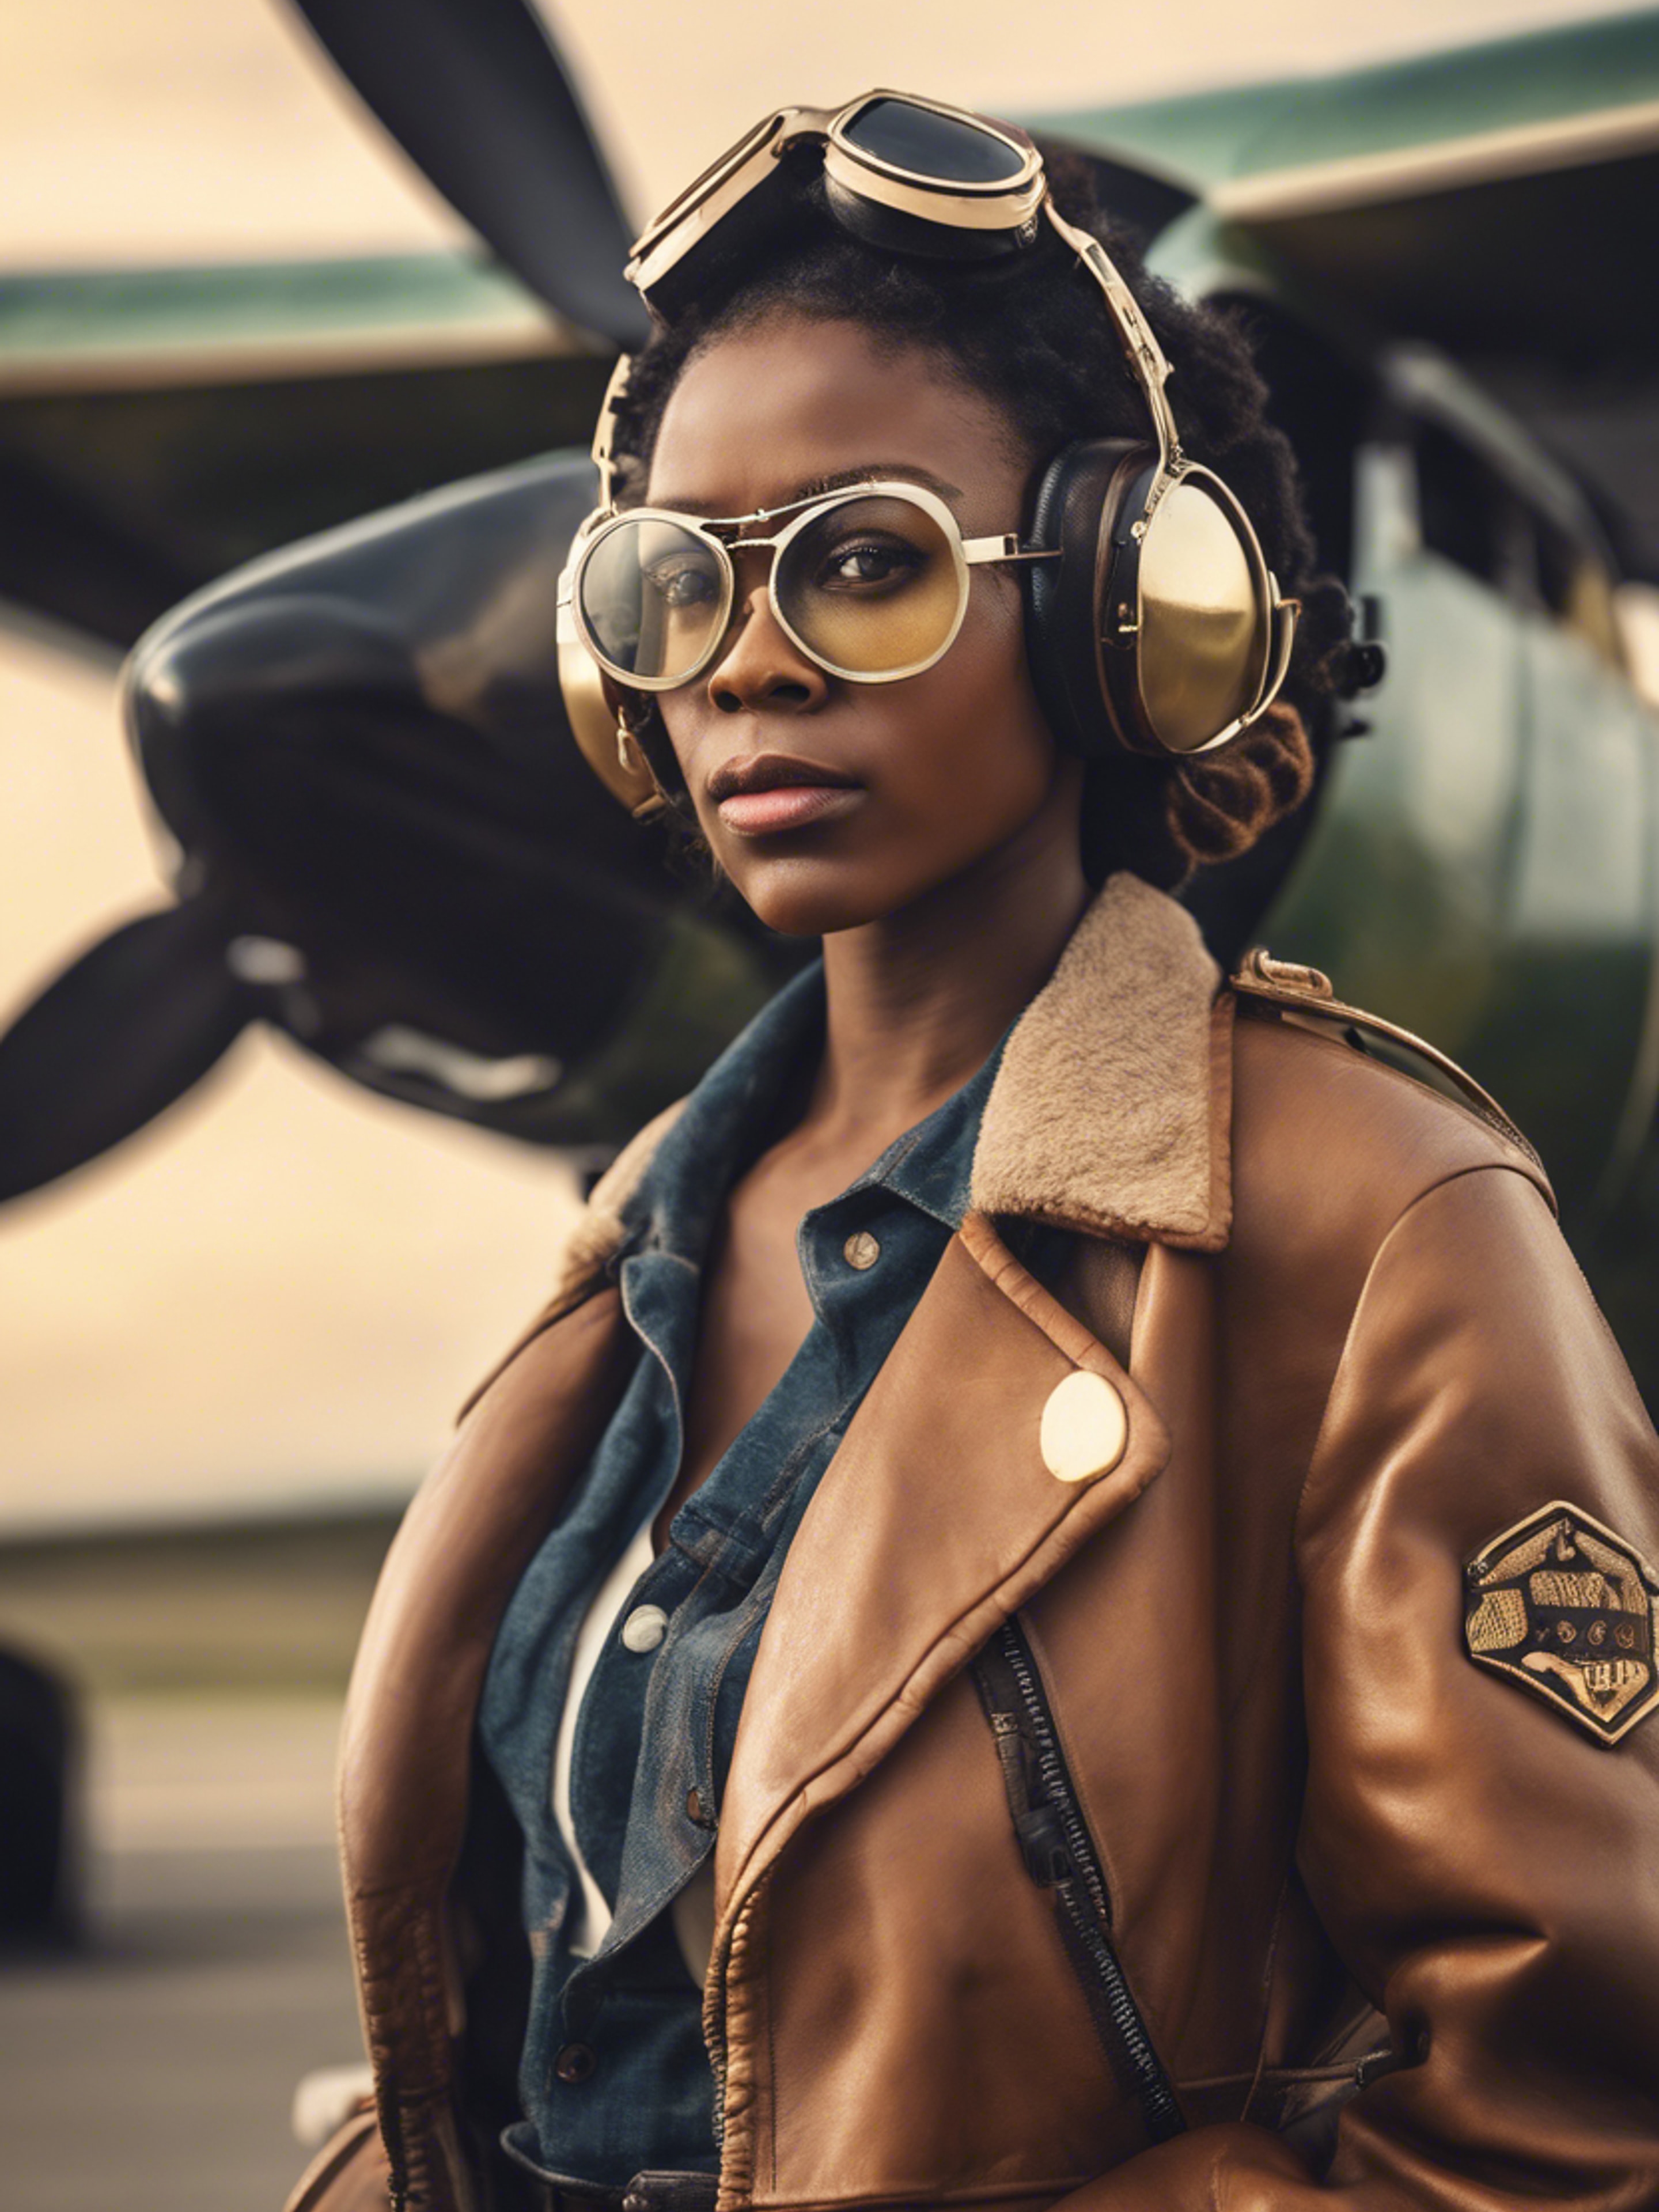 A black girl in an aviator jacket and goggles flying a retro propeller plane. Tapeta[82958076c6f747e0ac9d]